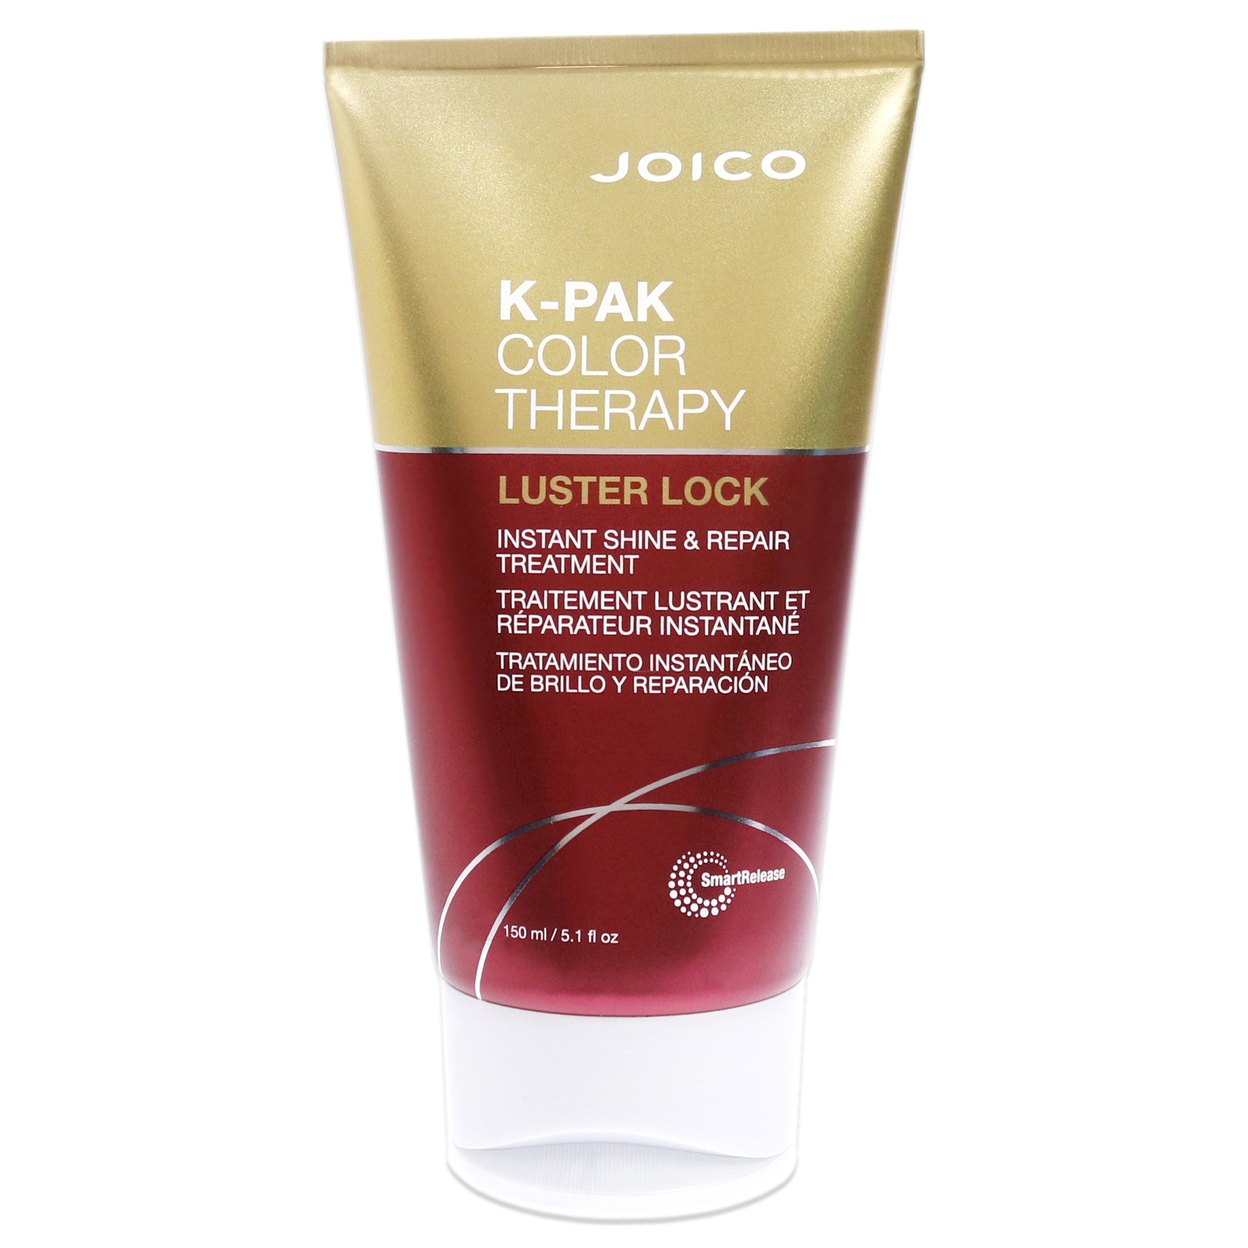 Joico Unisex HAIRCARE K-Pak Color Therapy Luster Lock 5.1 Oz